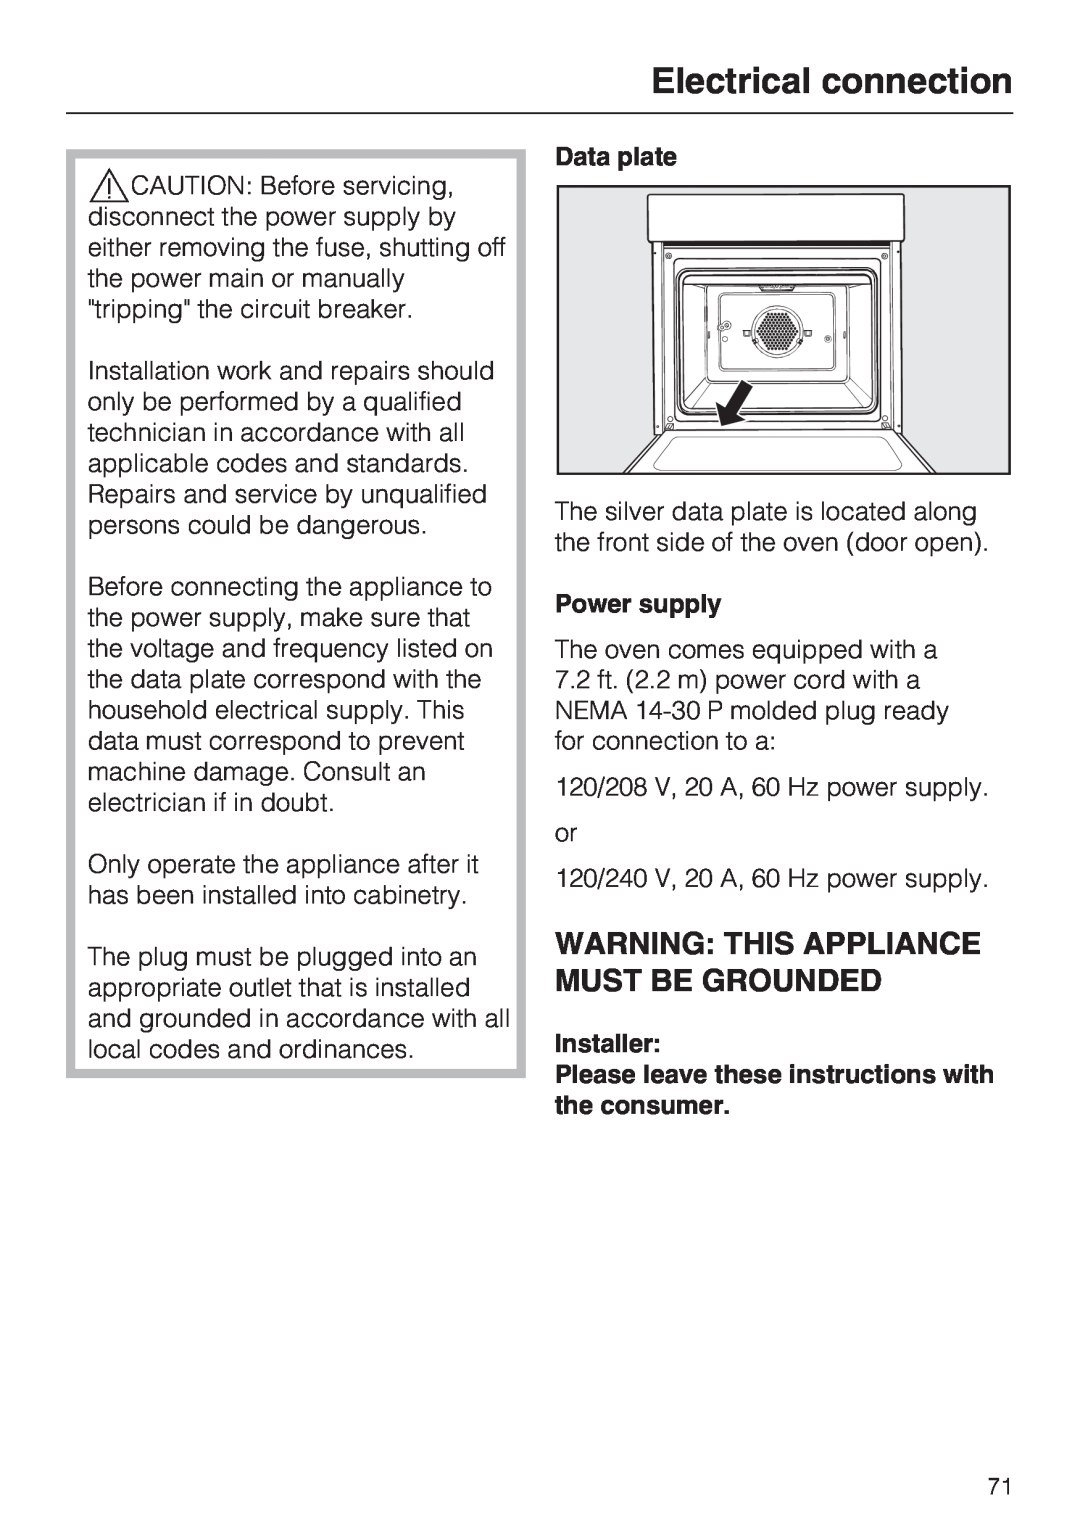 Miele H 4688 B, H4682B installation instructions Electrical connection, Warning This Appliance Must Be Grounded 